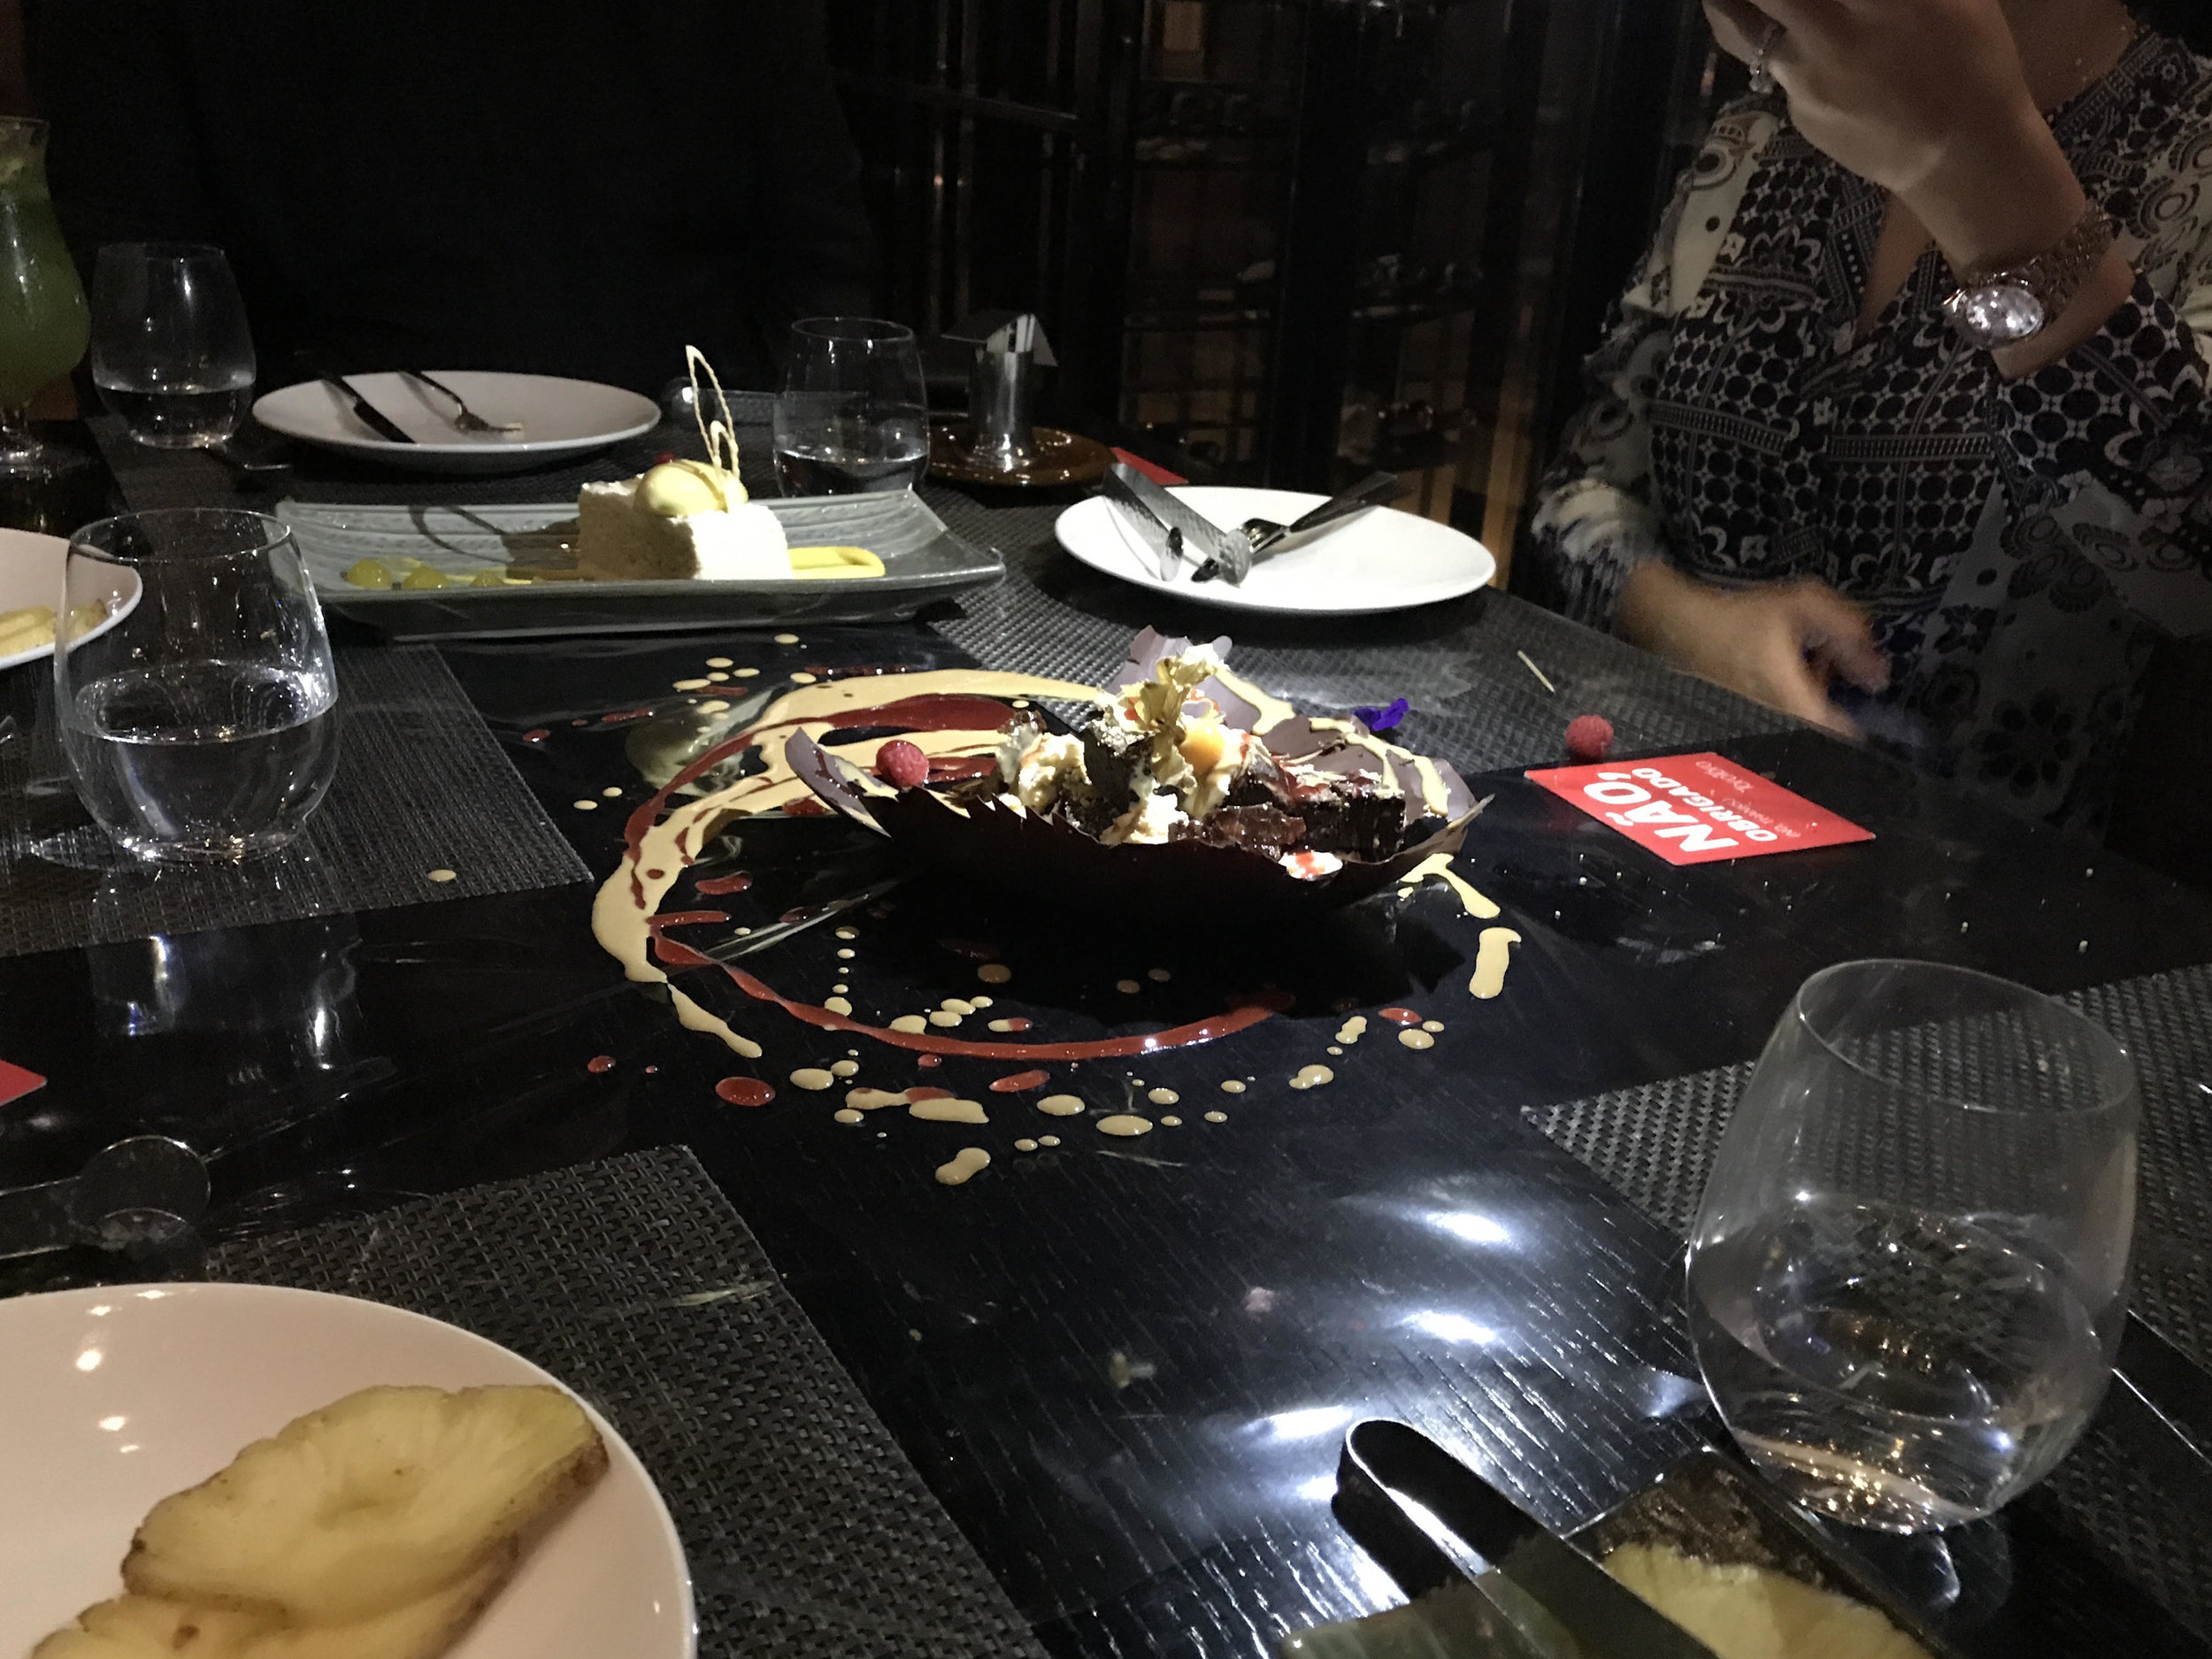  Dessert Bomb. Chocolate Shell with goodies inside dropped on the table 